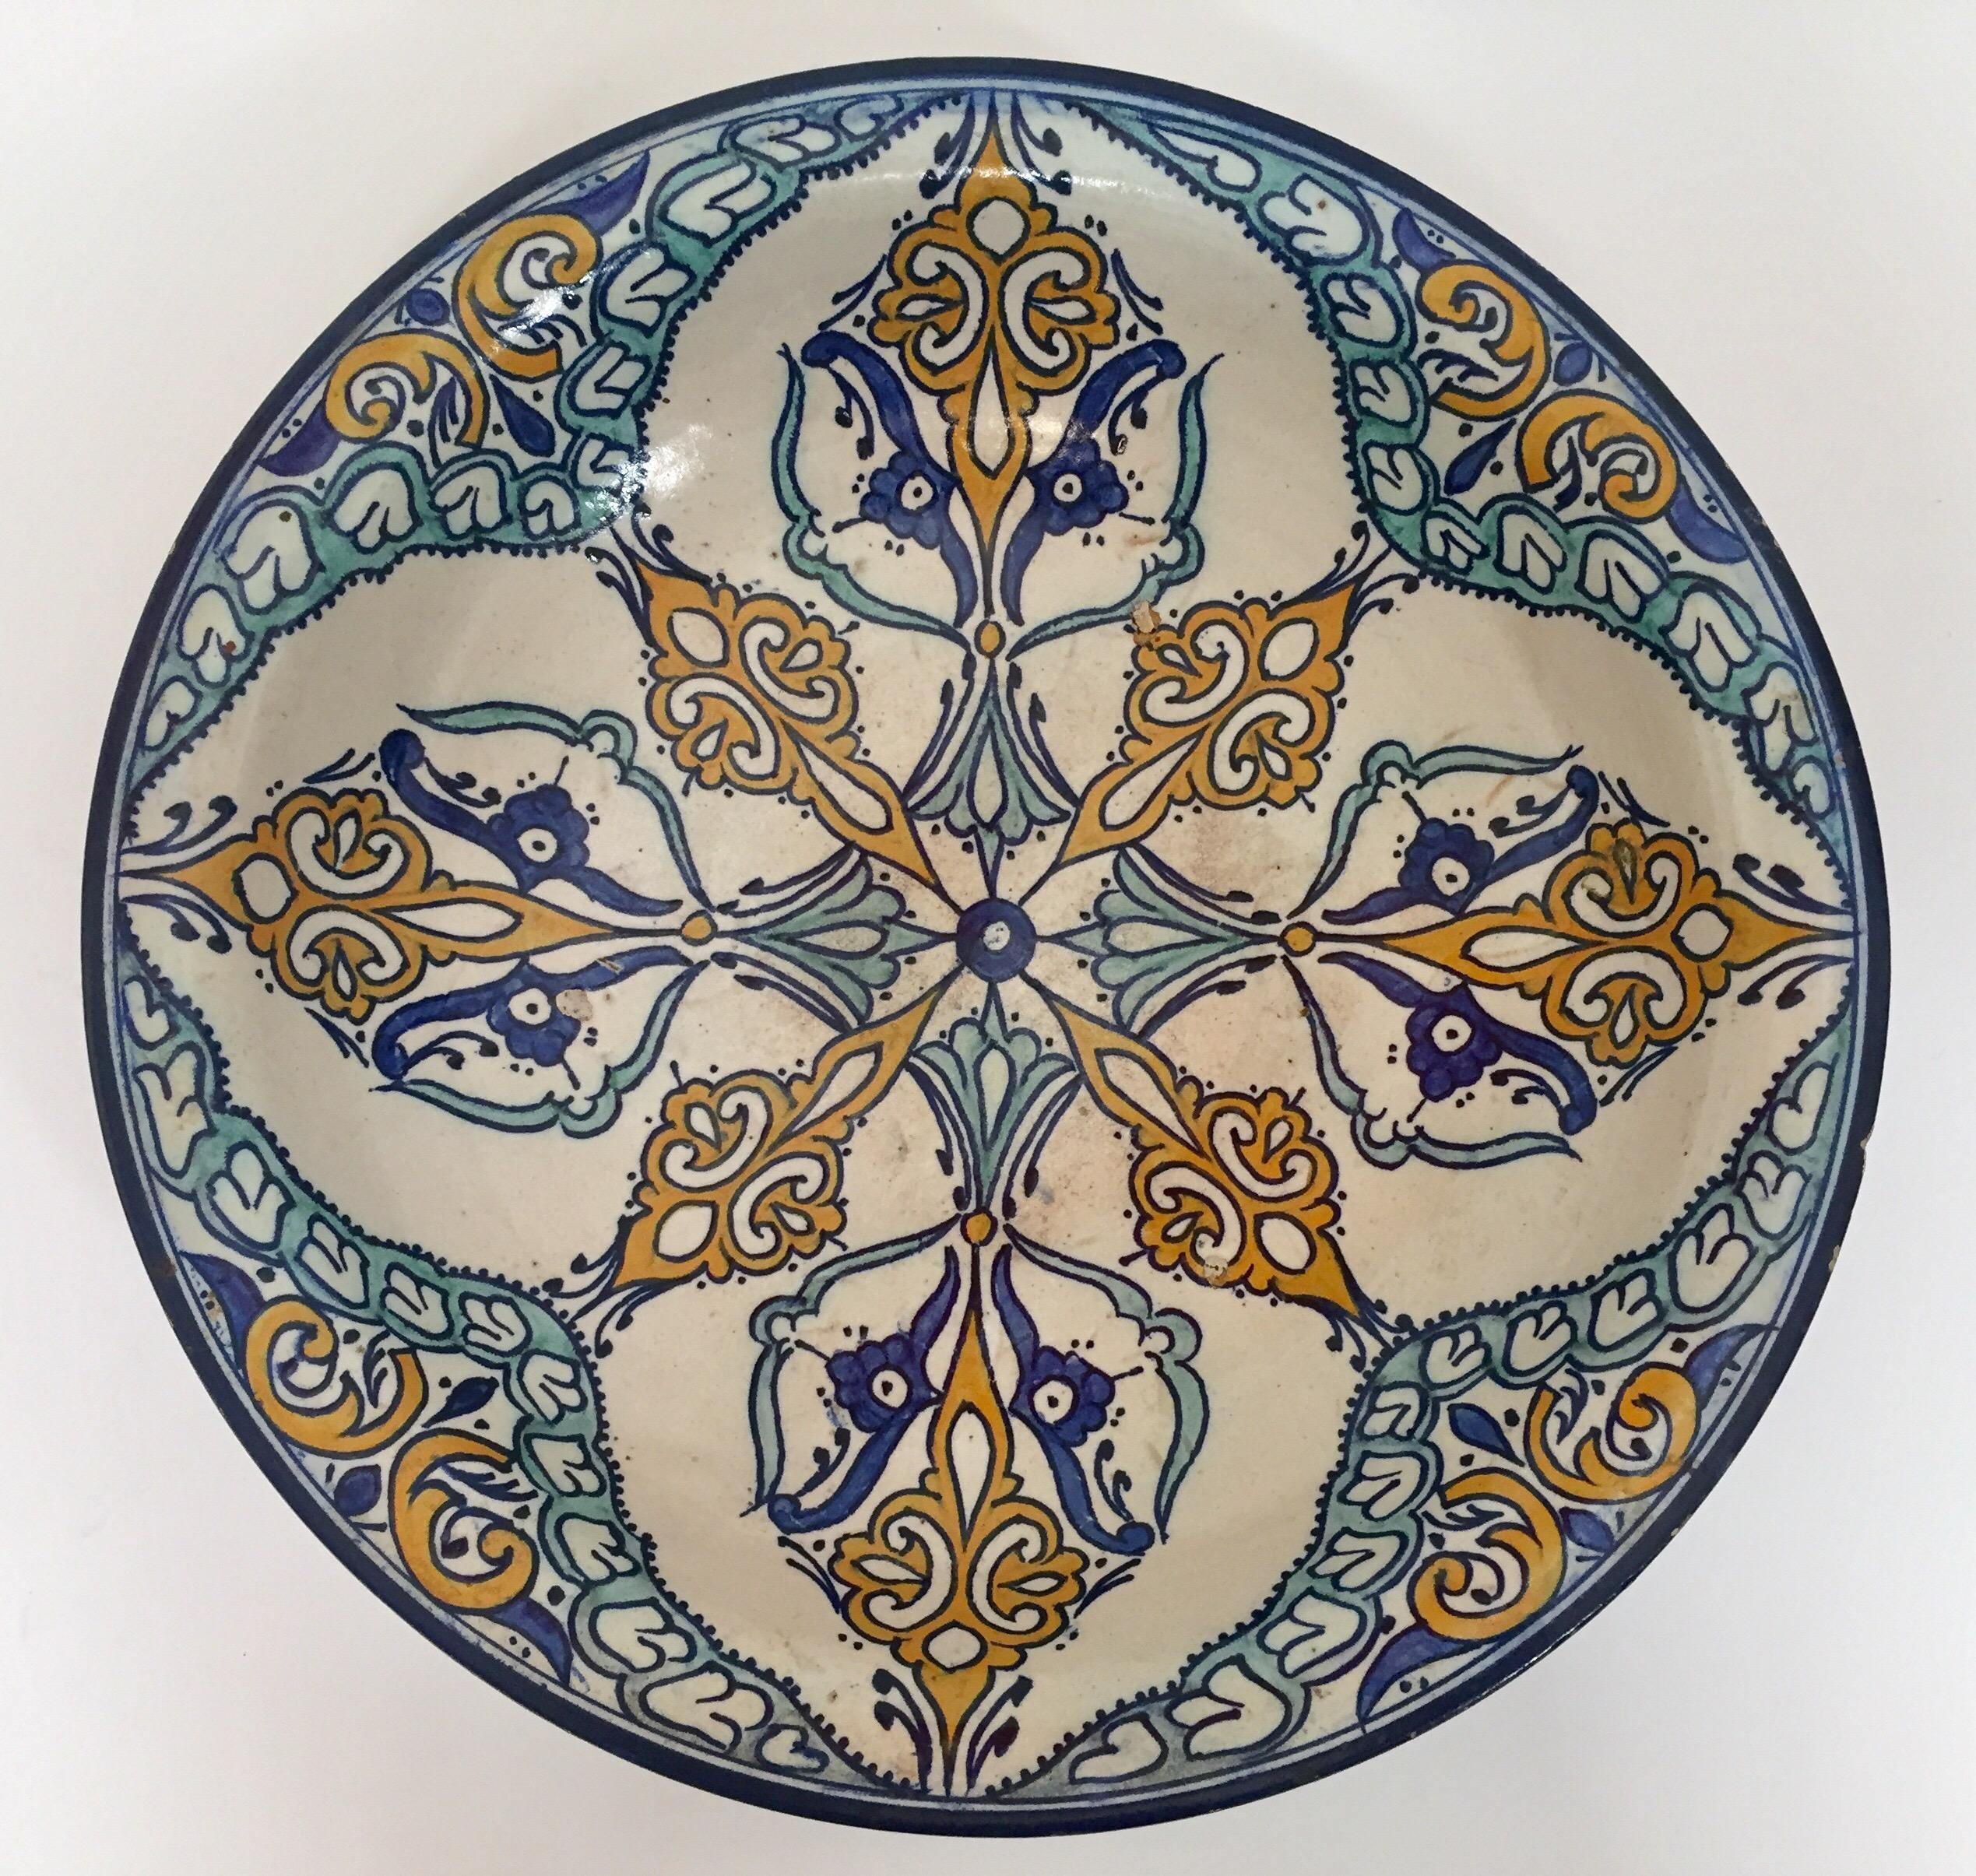 Large Moroccan ceramic bowl handcrafted in Fez by artisans.
Hand painted Moorish ceramic plate from Fez Morocco.
This kind of Moorish Spanish style ceramic artwork could be found at the Alhambra palace in Granada Spain.
Turquoise, blue, safran